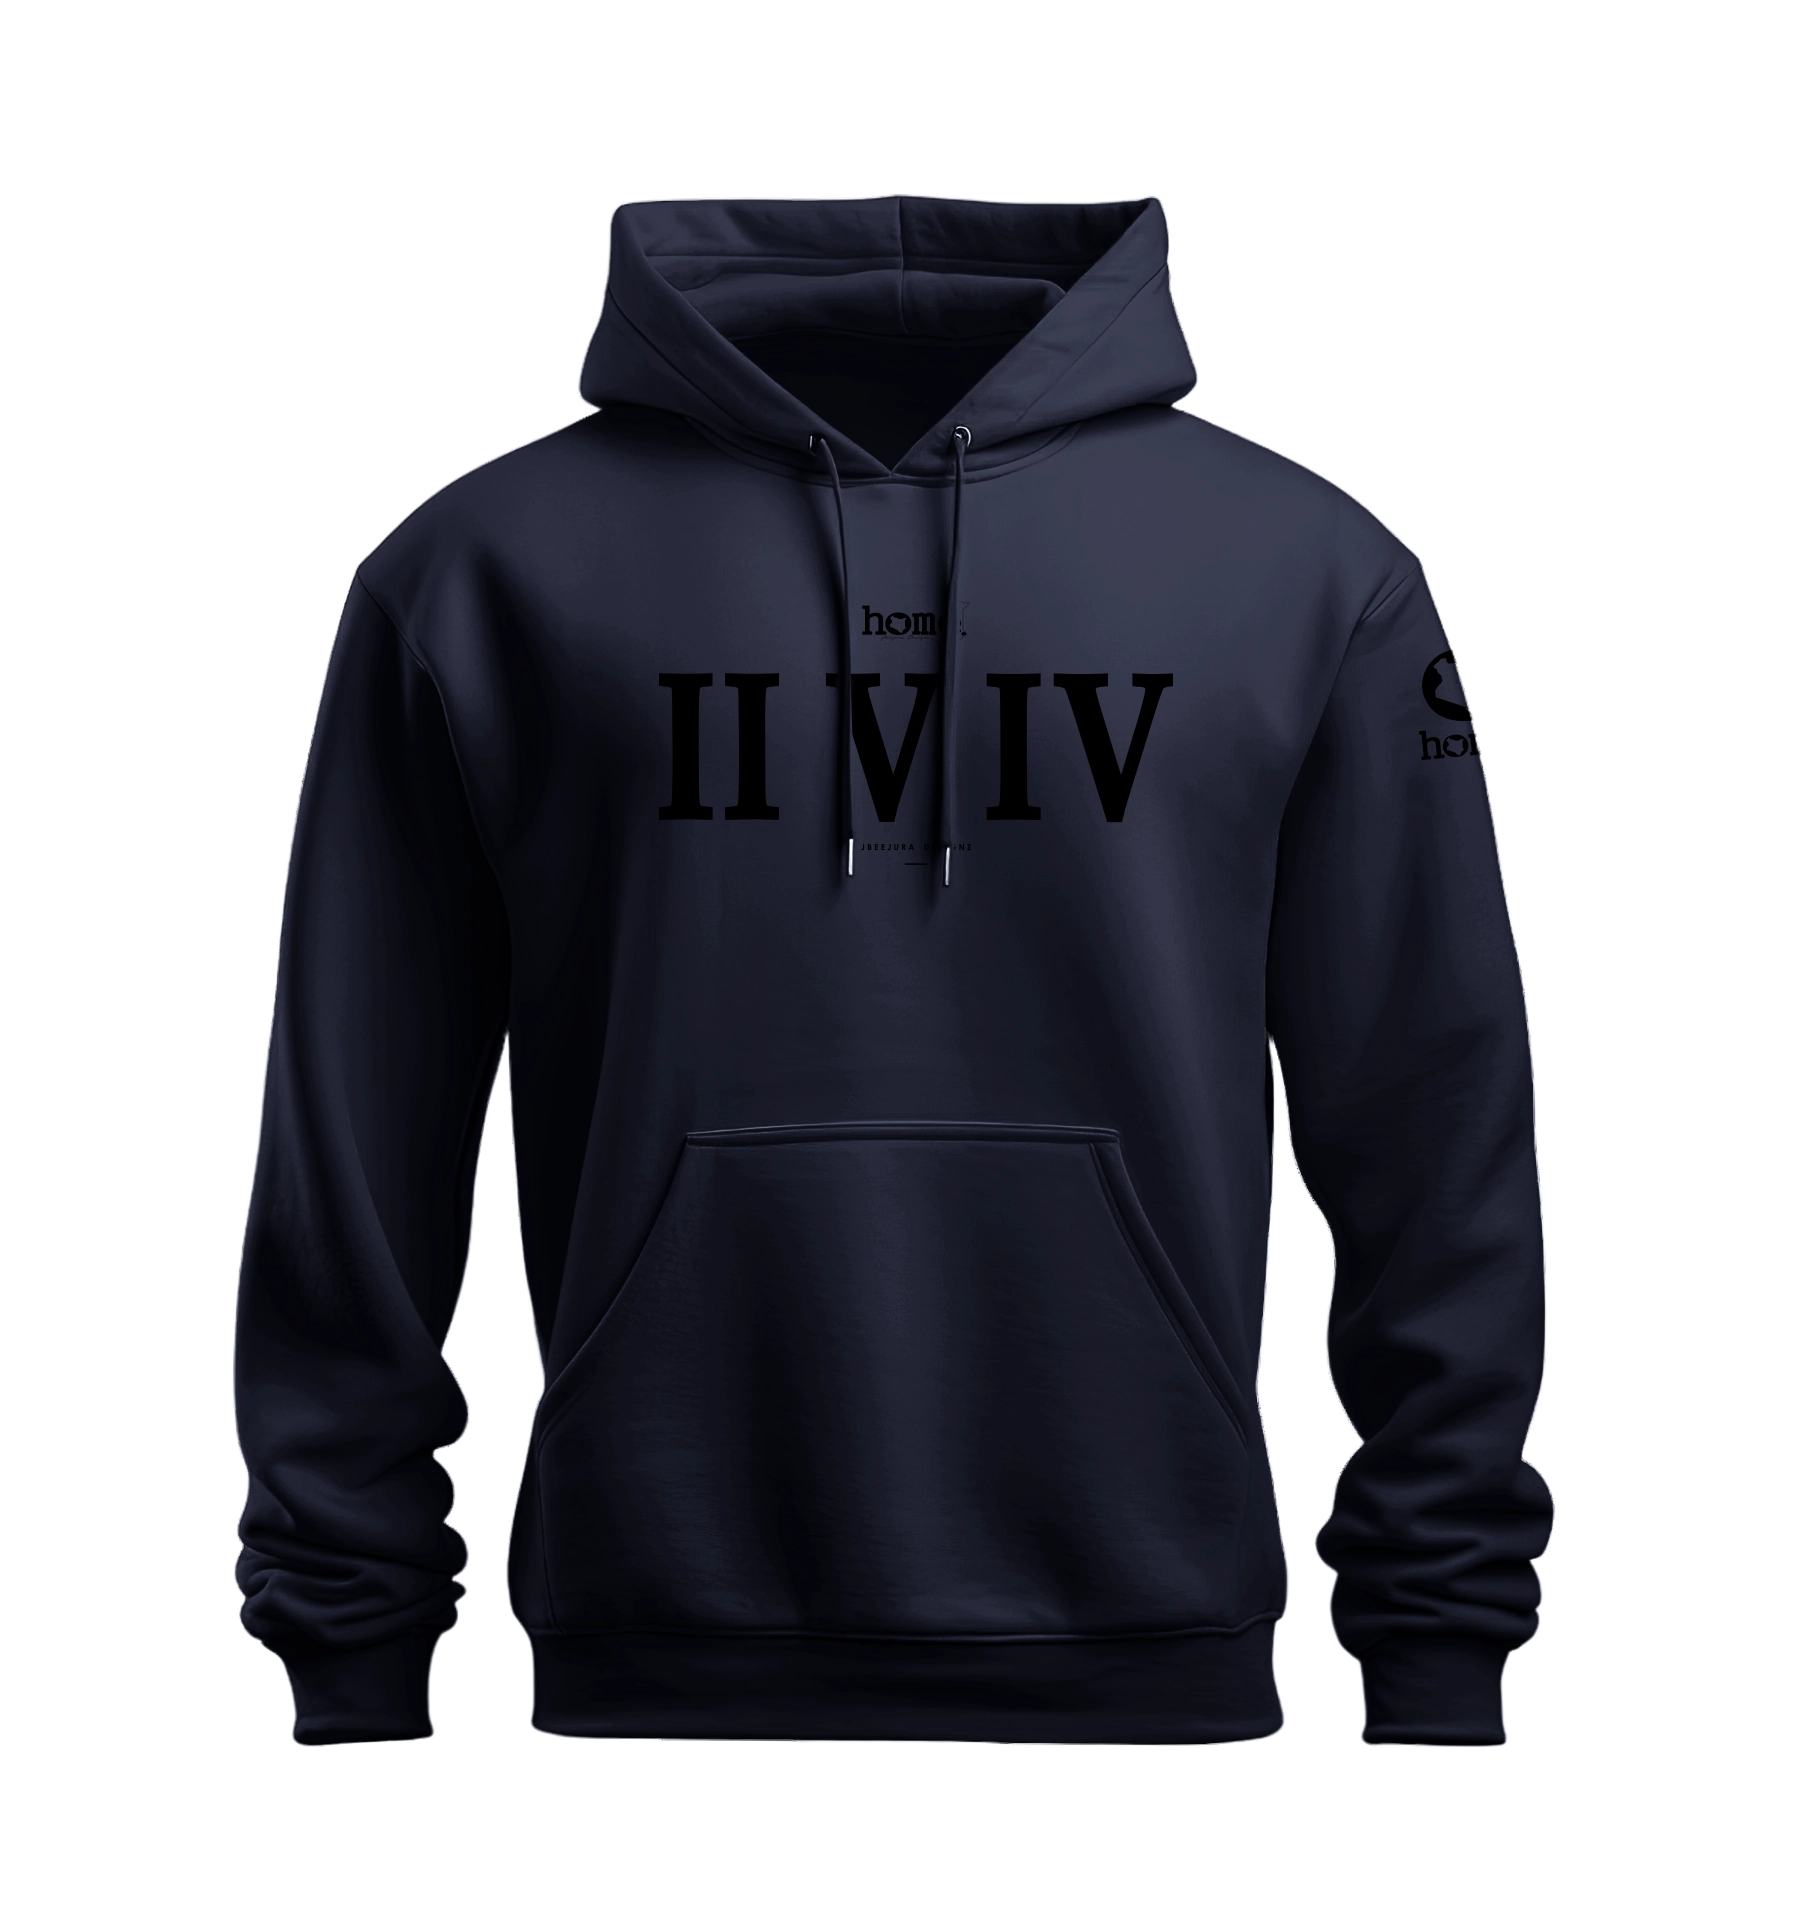 home_254 NUVETRA™ NAVY BLUE HOODIE WITH A BLACK ROMAN NUMERALS PRINT 